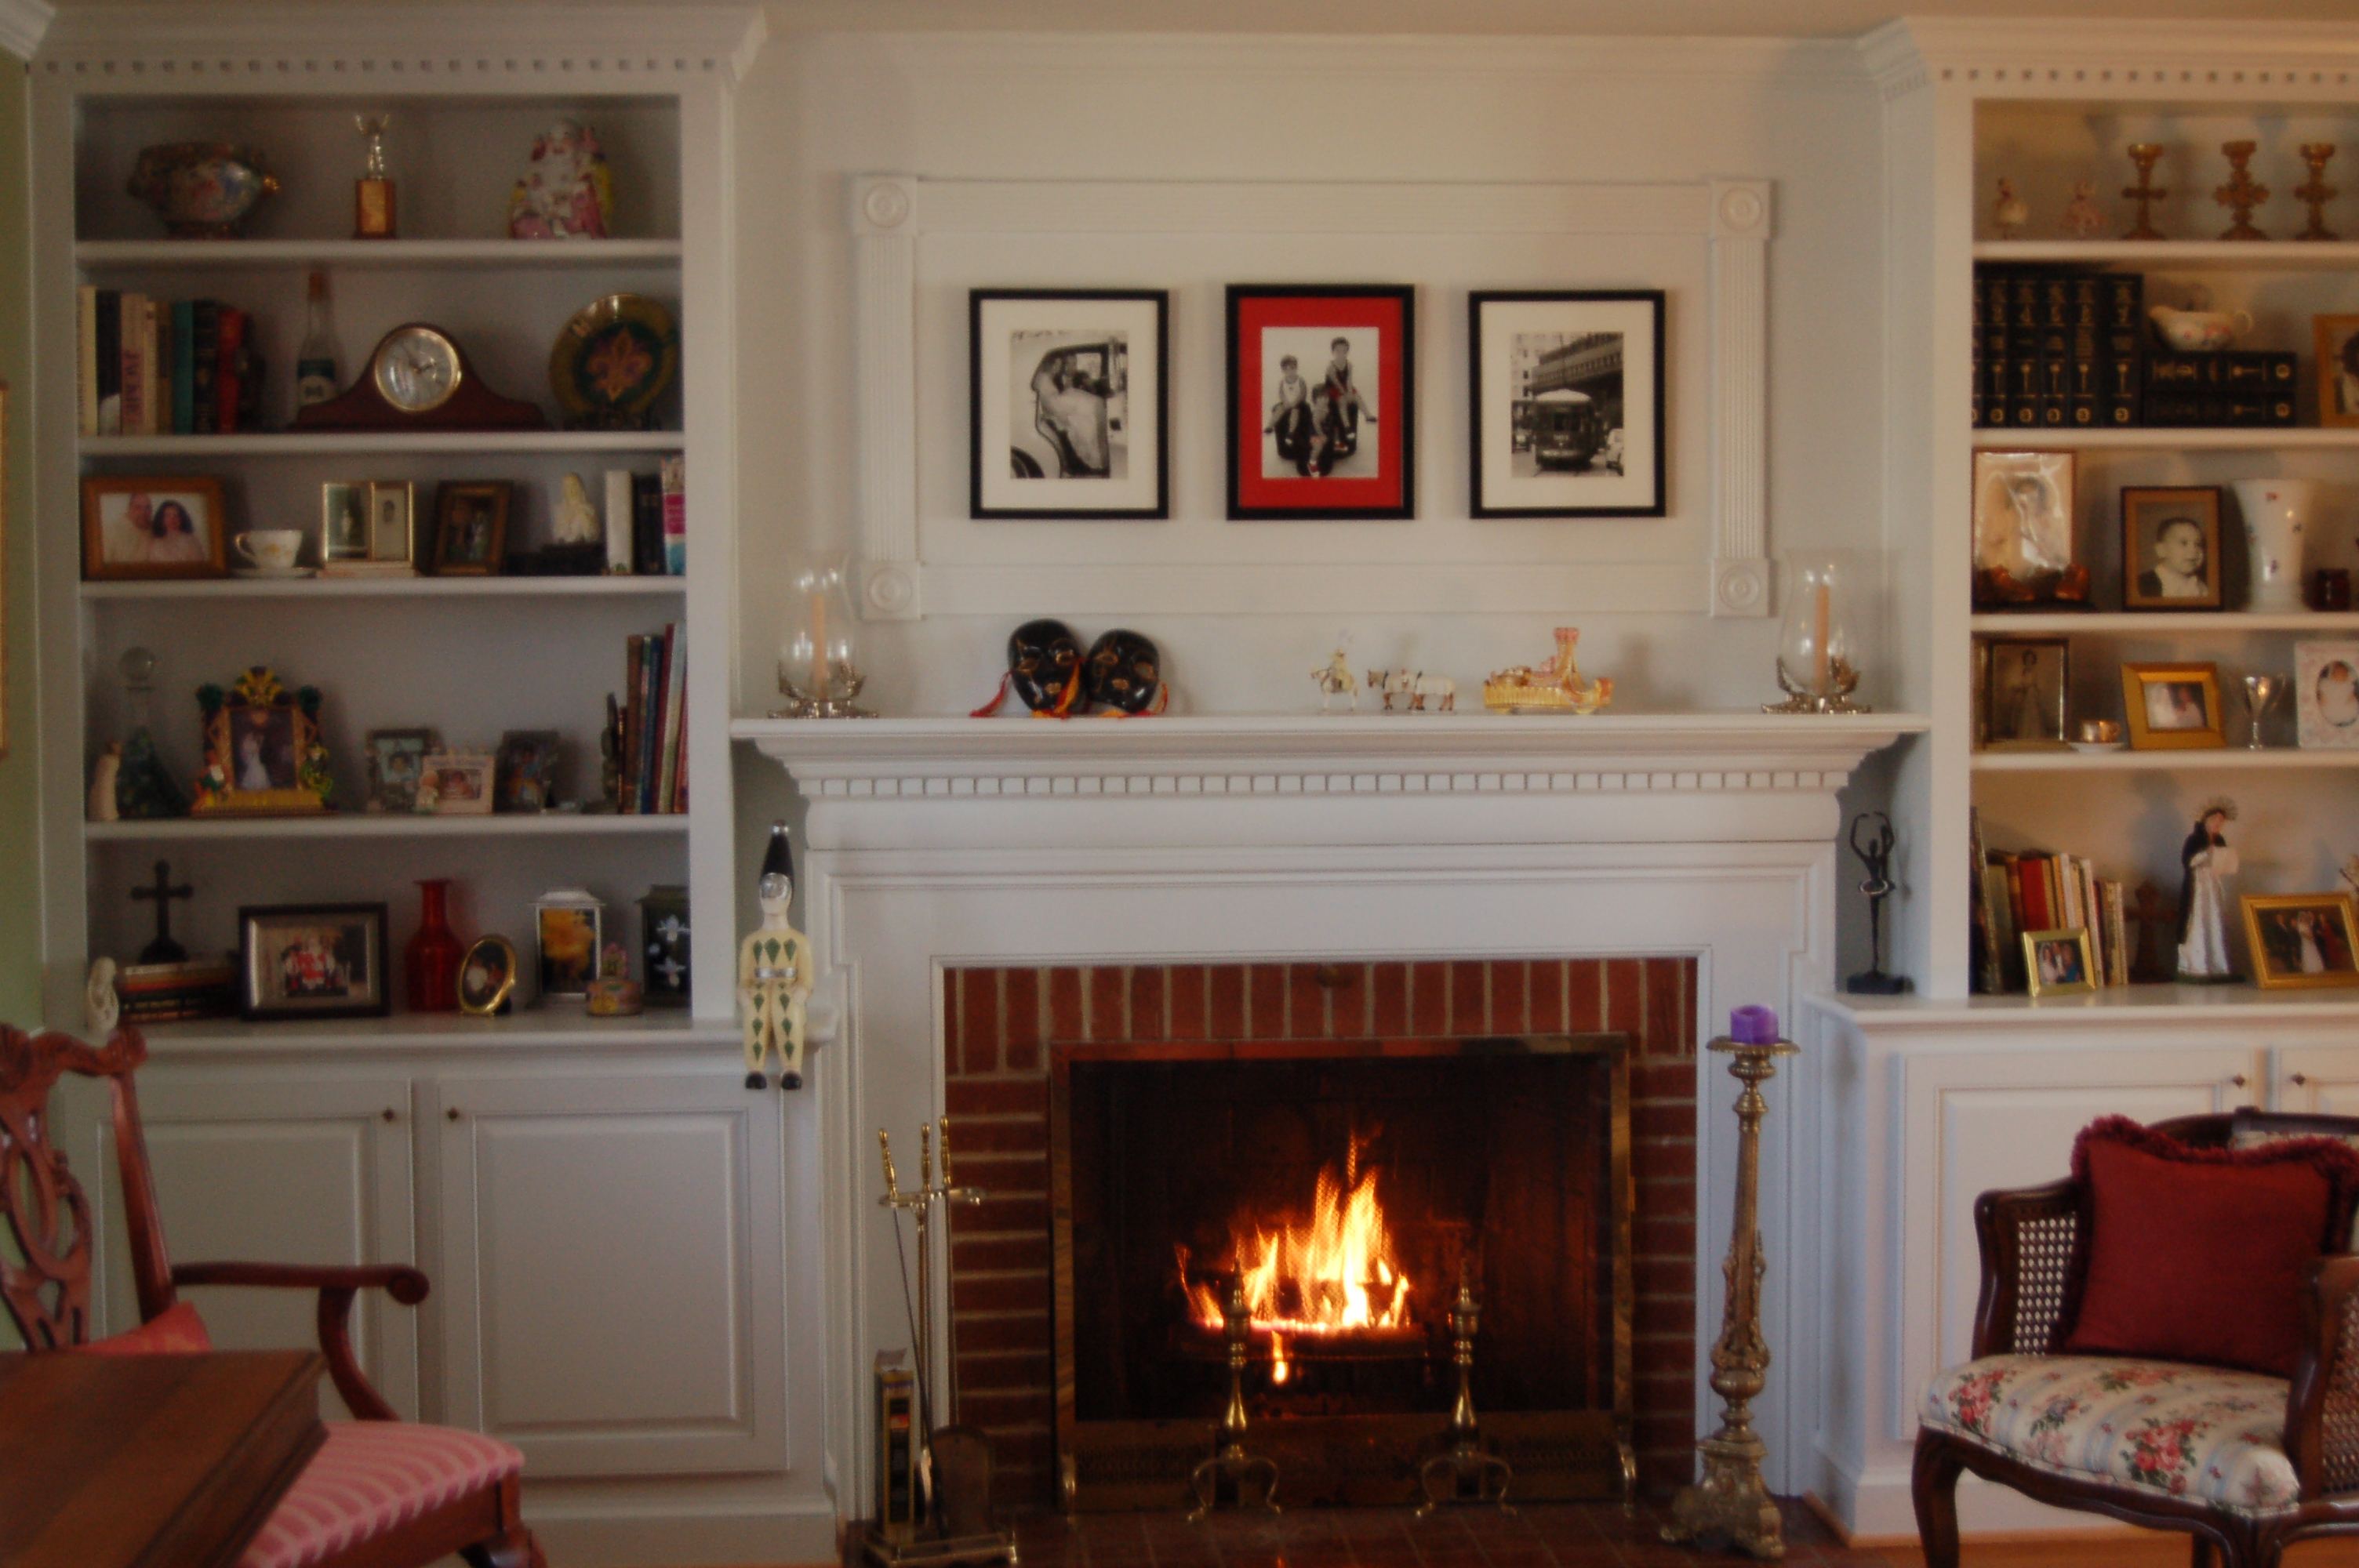 Built In Shelves Around Fireplace Beautiful Built In Bookcases with Fireplace Cj29 – Roc Munity